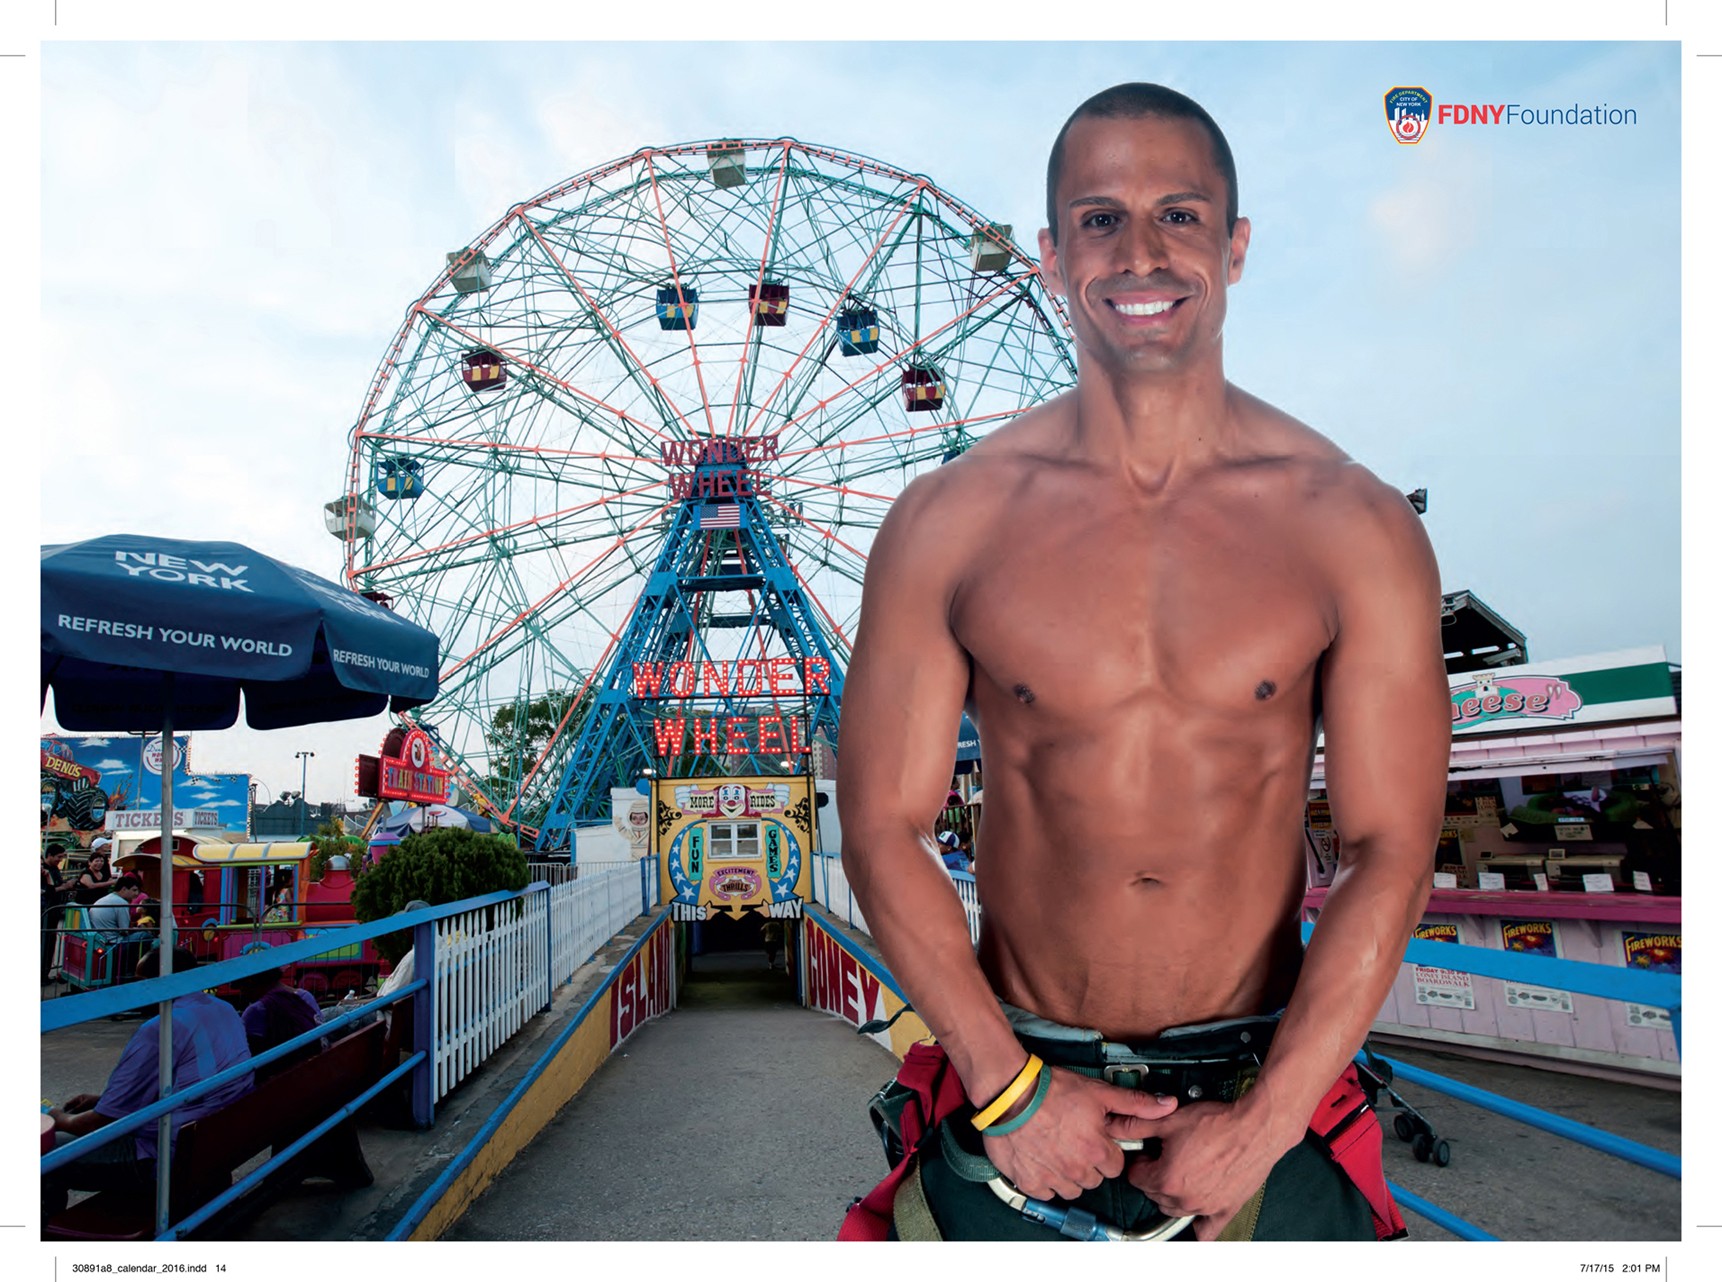 July Firefighter Jose Cordero shows what he’s got in front of the Wonder Wheel. Photo courtesy of FDNY